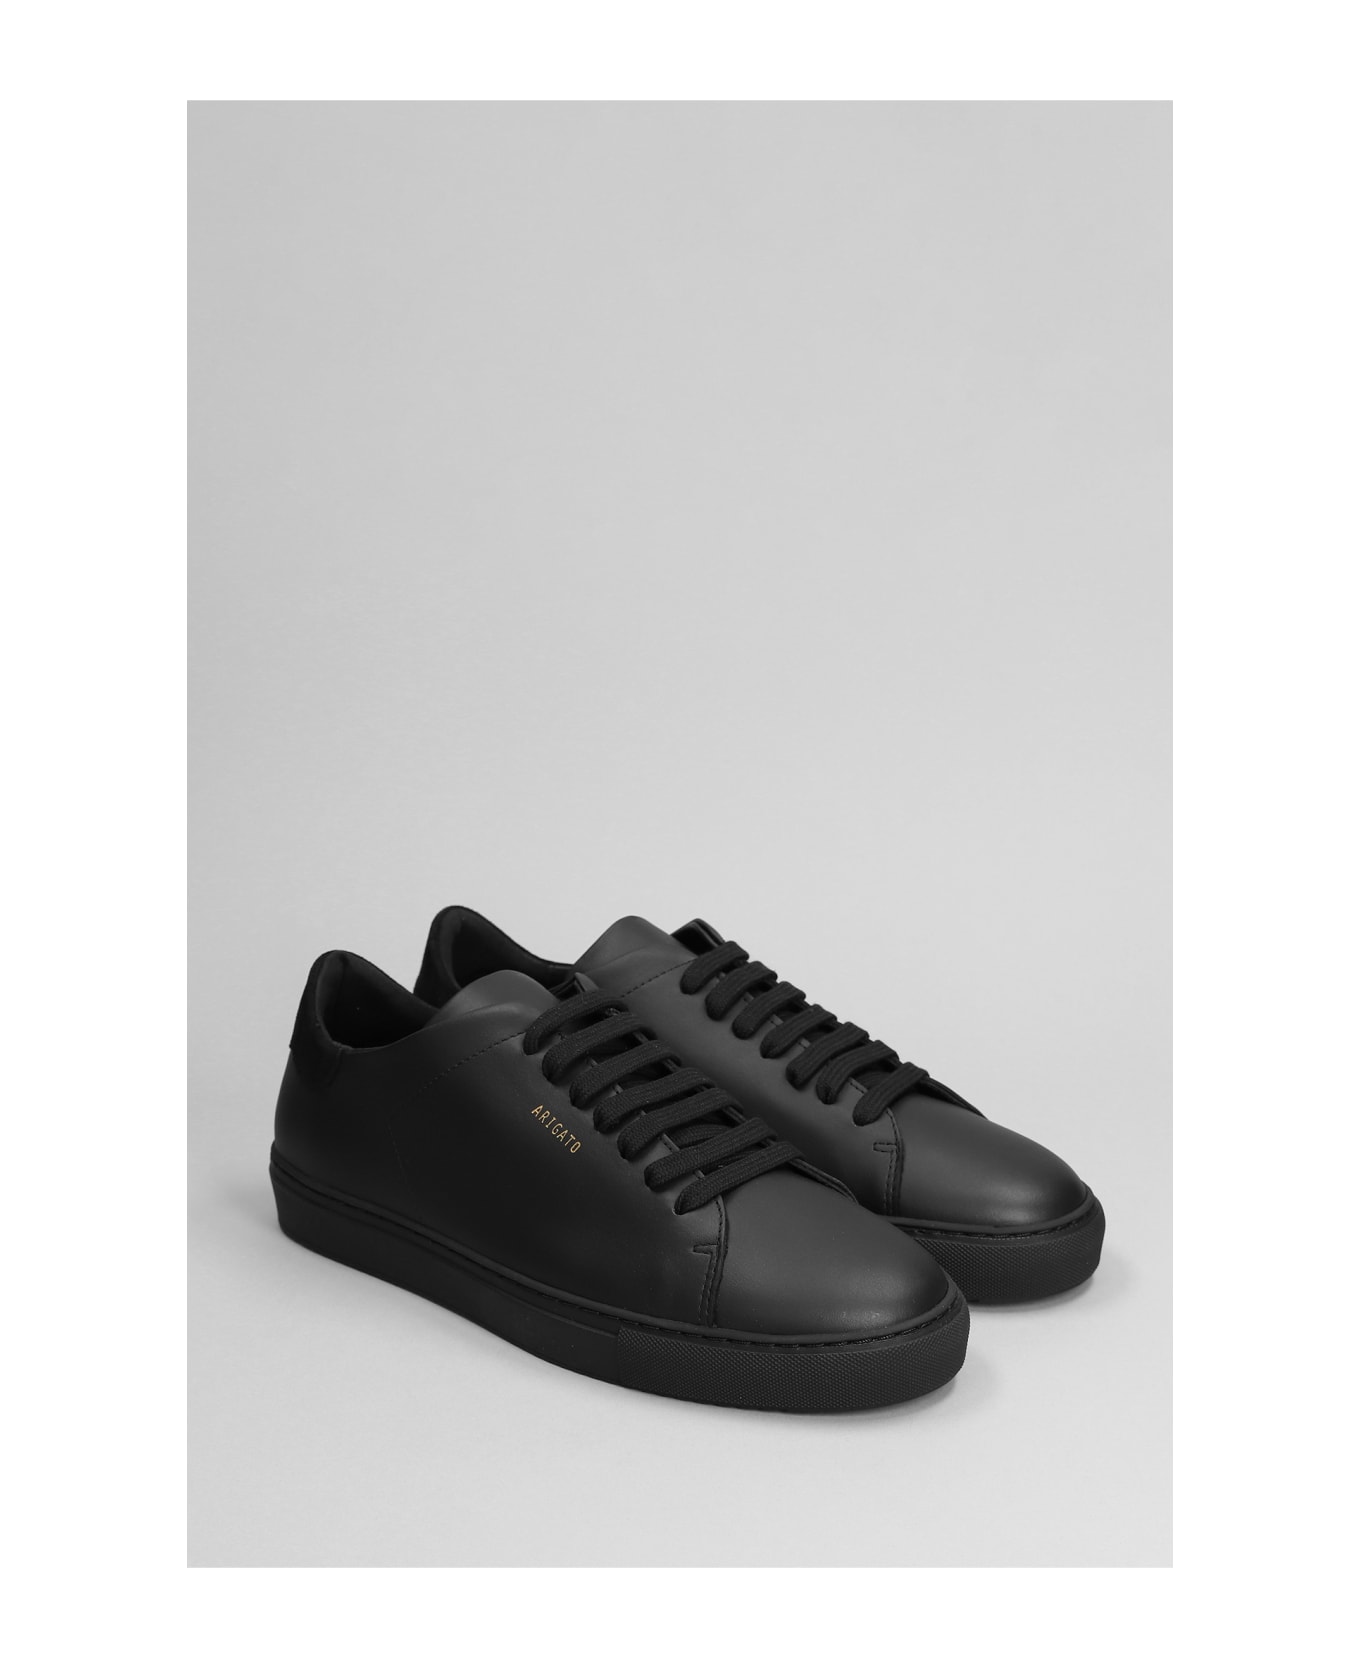 Axel Arigato Clean 90 Sneakers In Black Suede And Leather - black